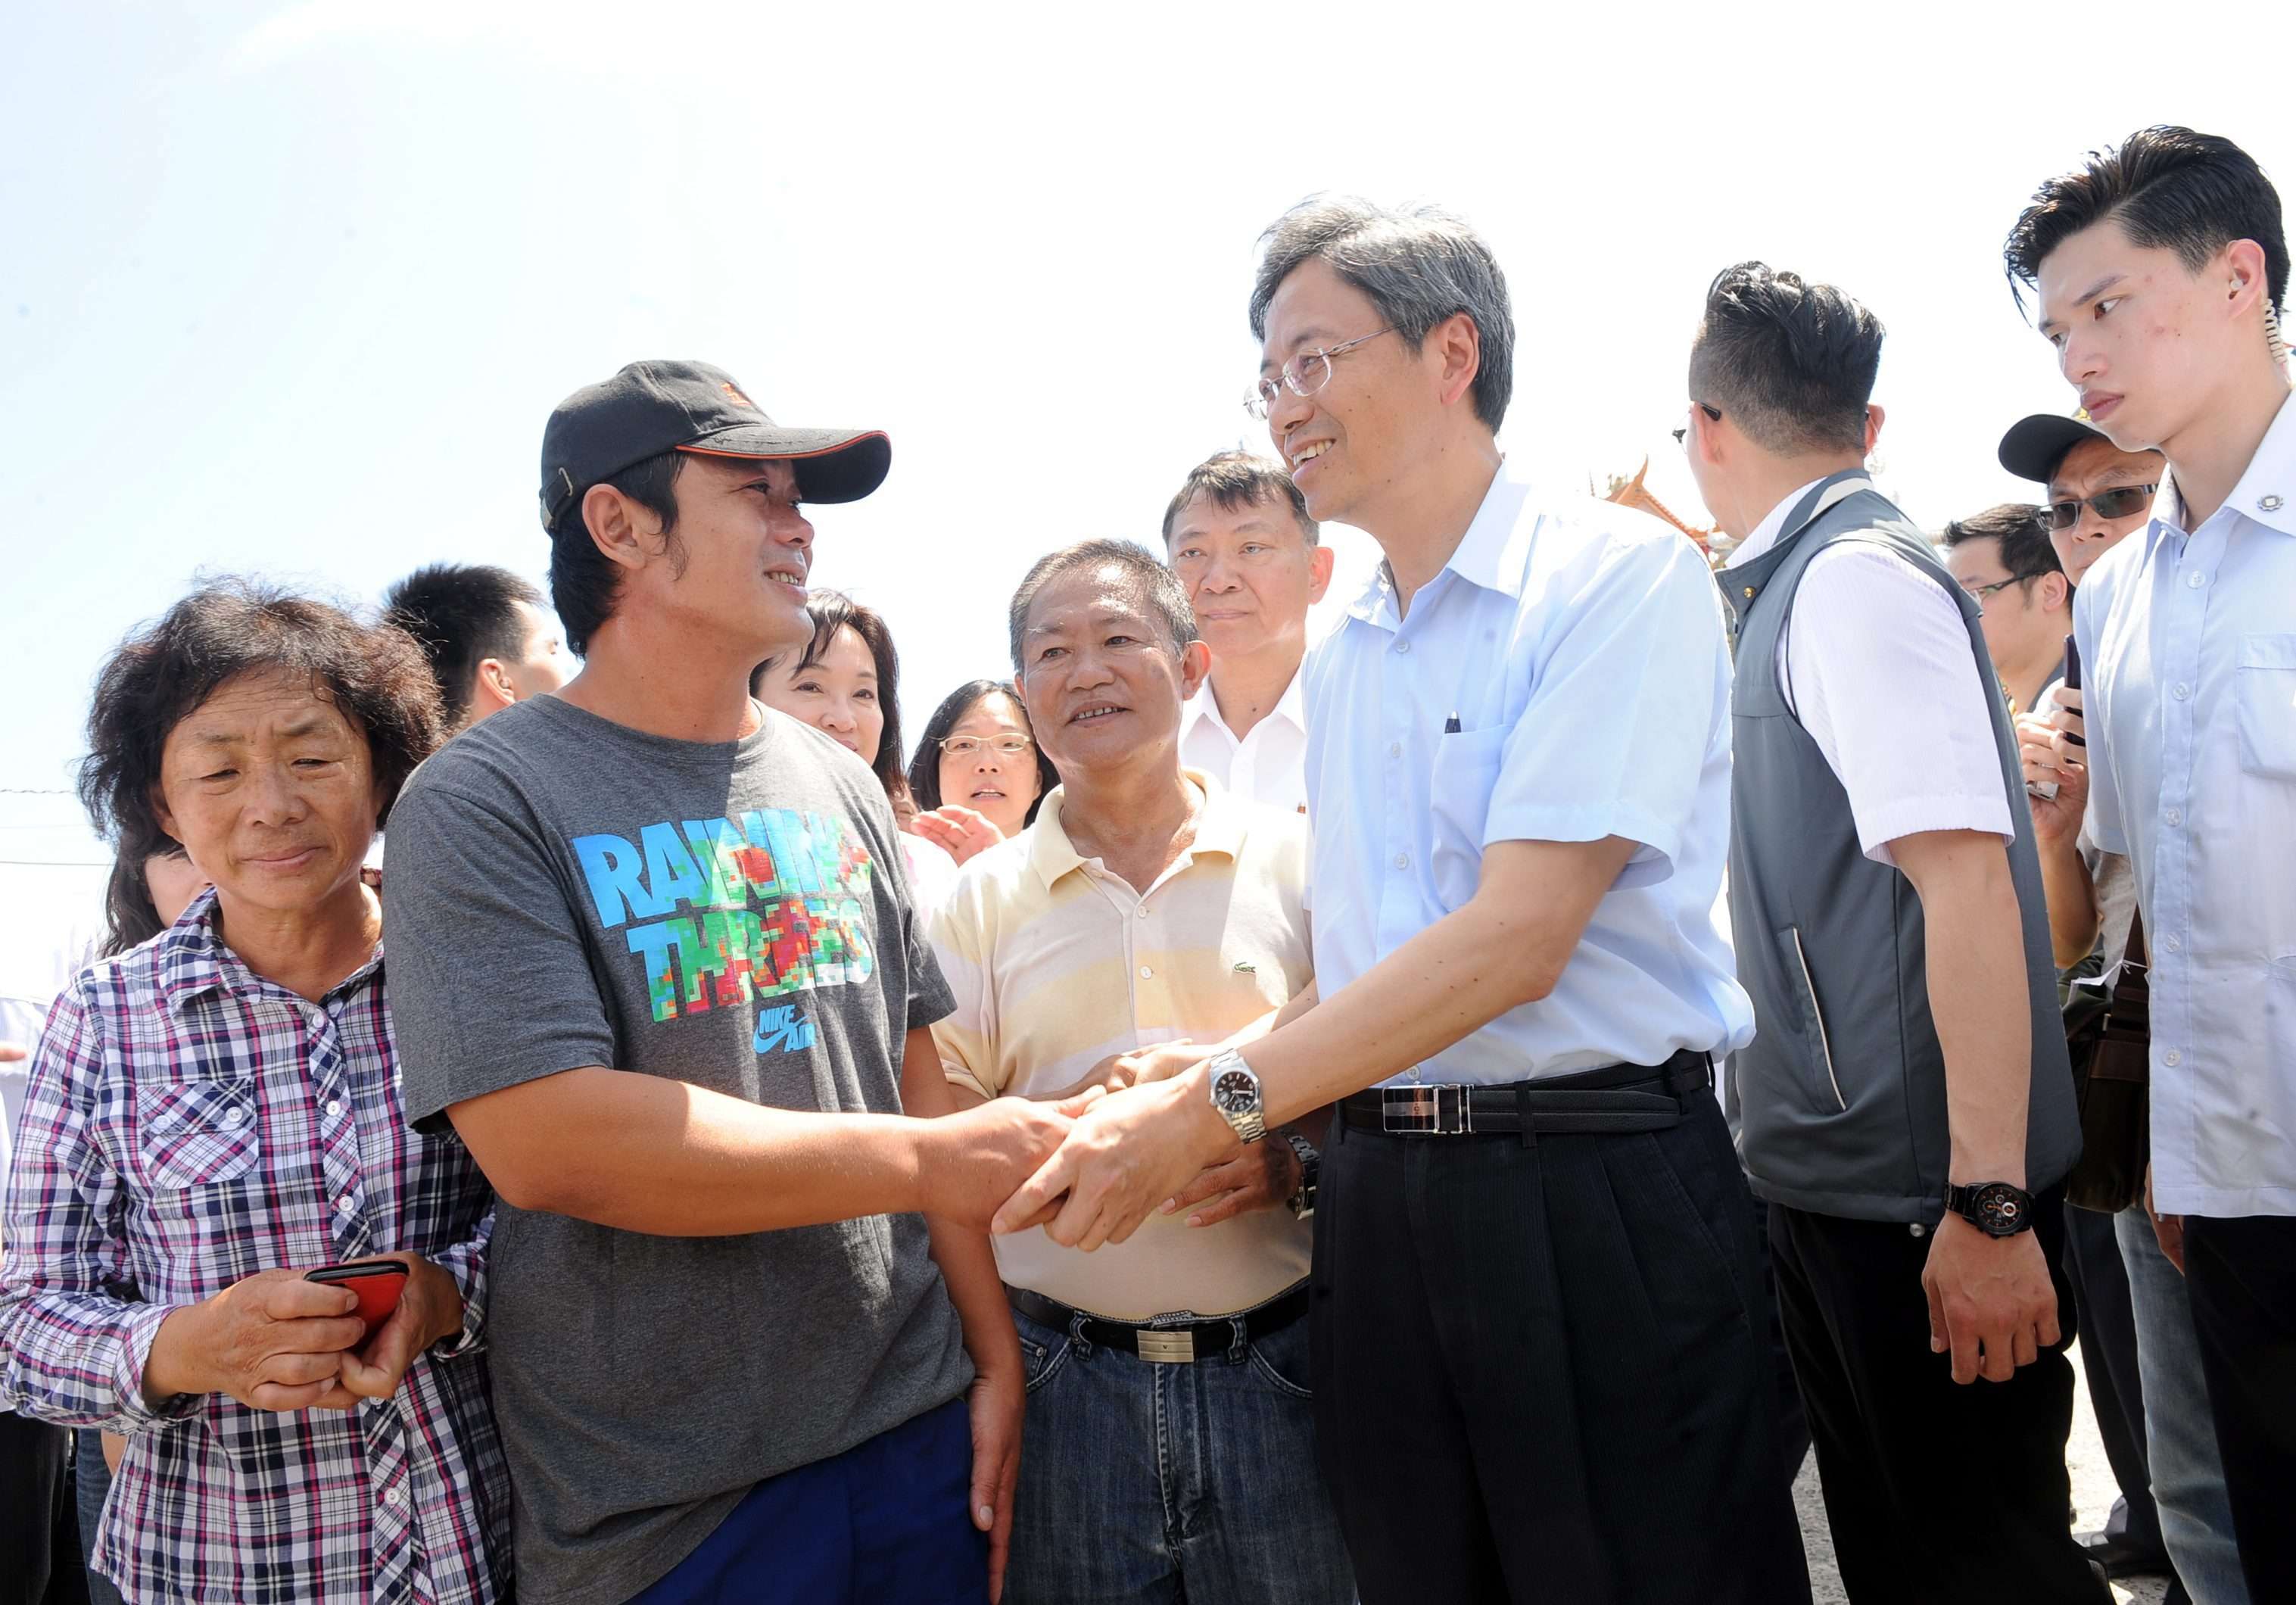 A handout photograph made available by the Taiwanese government shows Premier Chang San-cheng greeting Captain Pan Chien-peng at Hsiao Liuchiu Port in Pingtung county, following Japan's release of Pan's boat, and Pan and nine crew members, after his father paid a fine. Photo: EPA